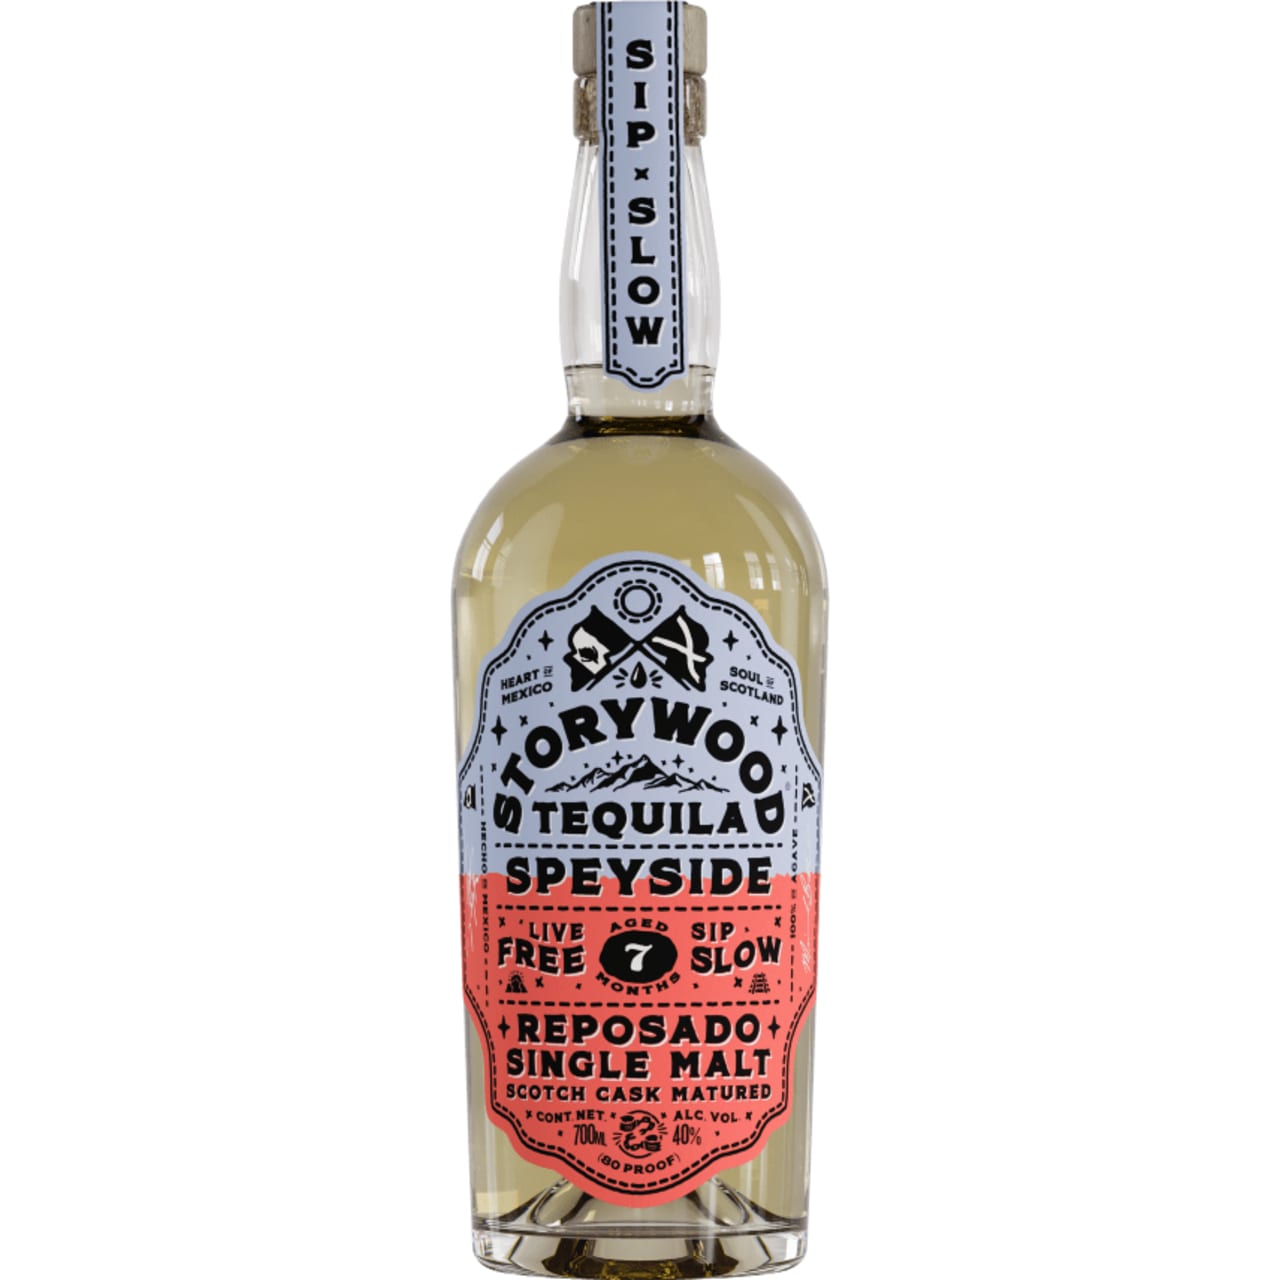 A bold, rebellious Tequila from Storywood, matured for seven months in Speyside single malt casks.